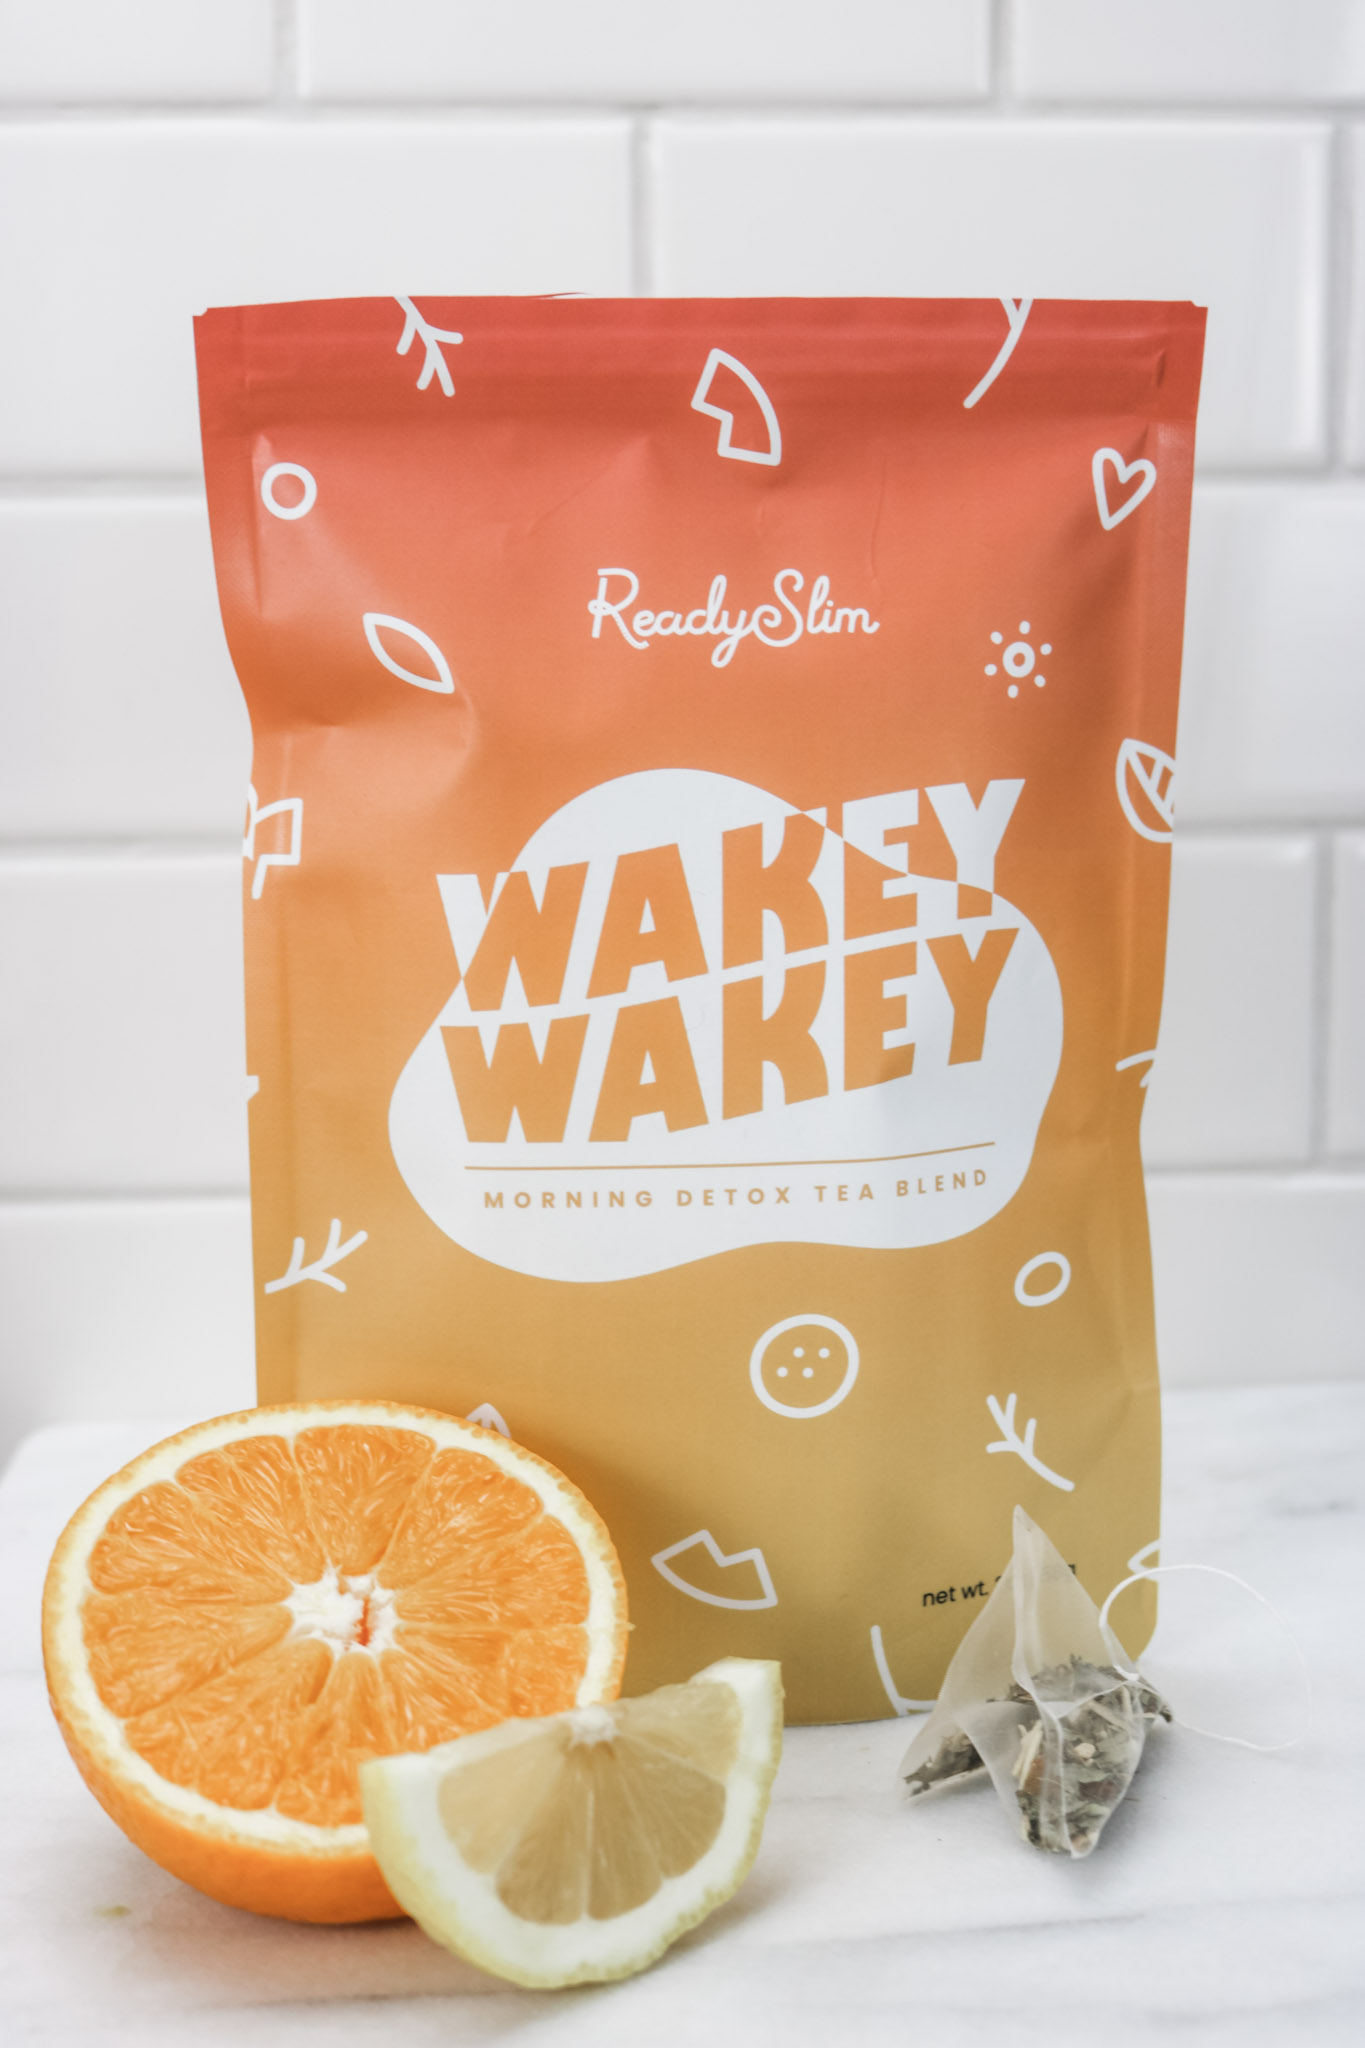 A bag of ReadySlim Wakey Wakey Morning Detox Tea Blend  is shown with a tea bag on the outside, and a slice of lemon and half an orange is shown. 